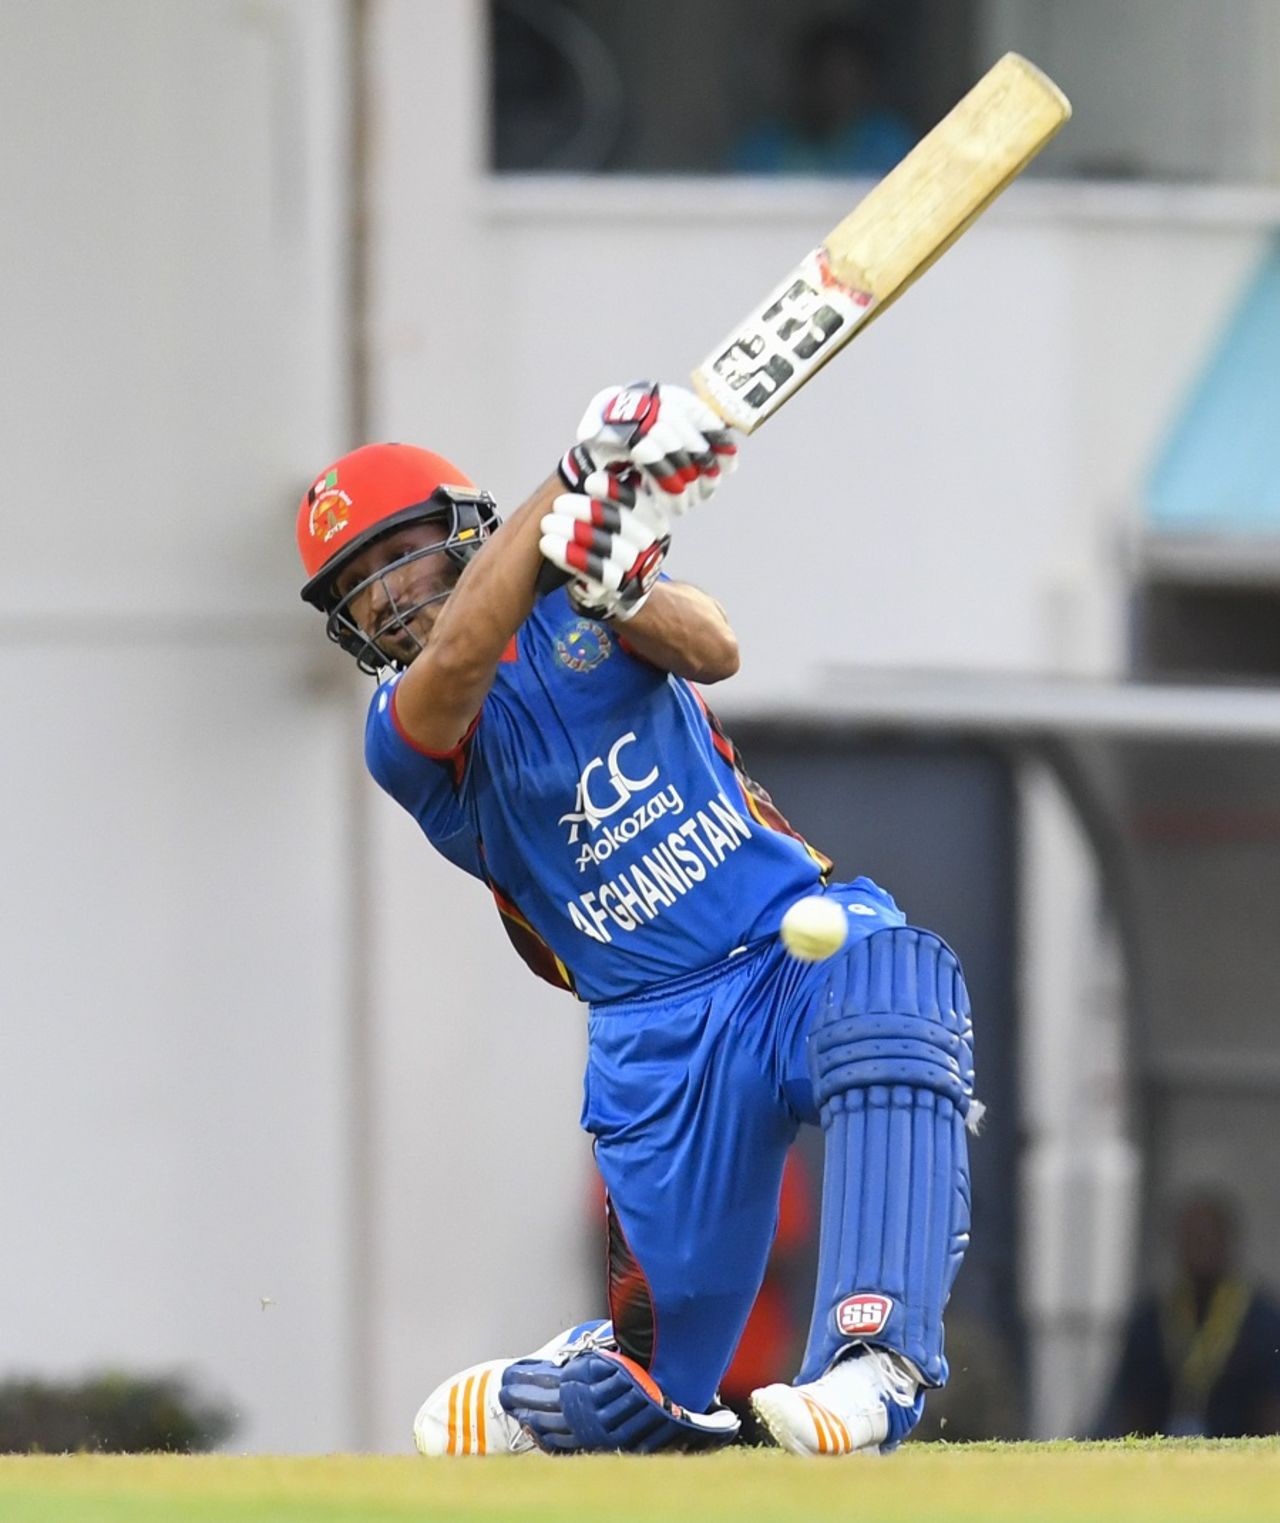 Gulbadin Naib made 41 not out off 28 balls, West Indies v Afghanistan, 1st ODI, St Lucia, June 9, 2017